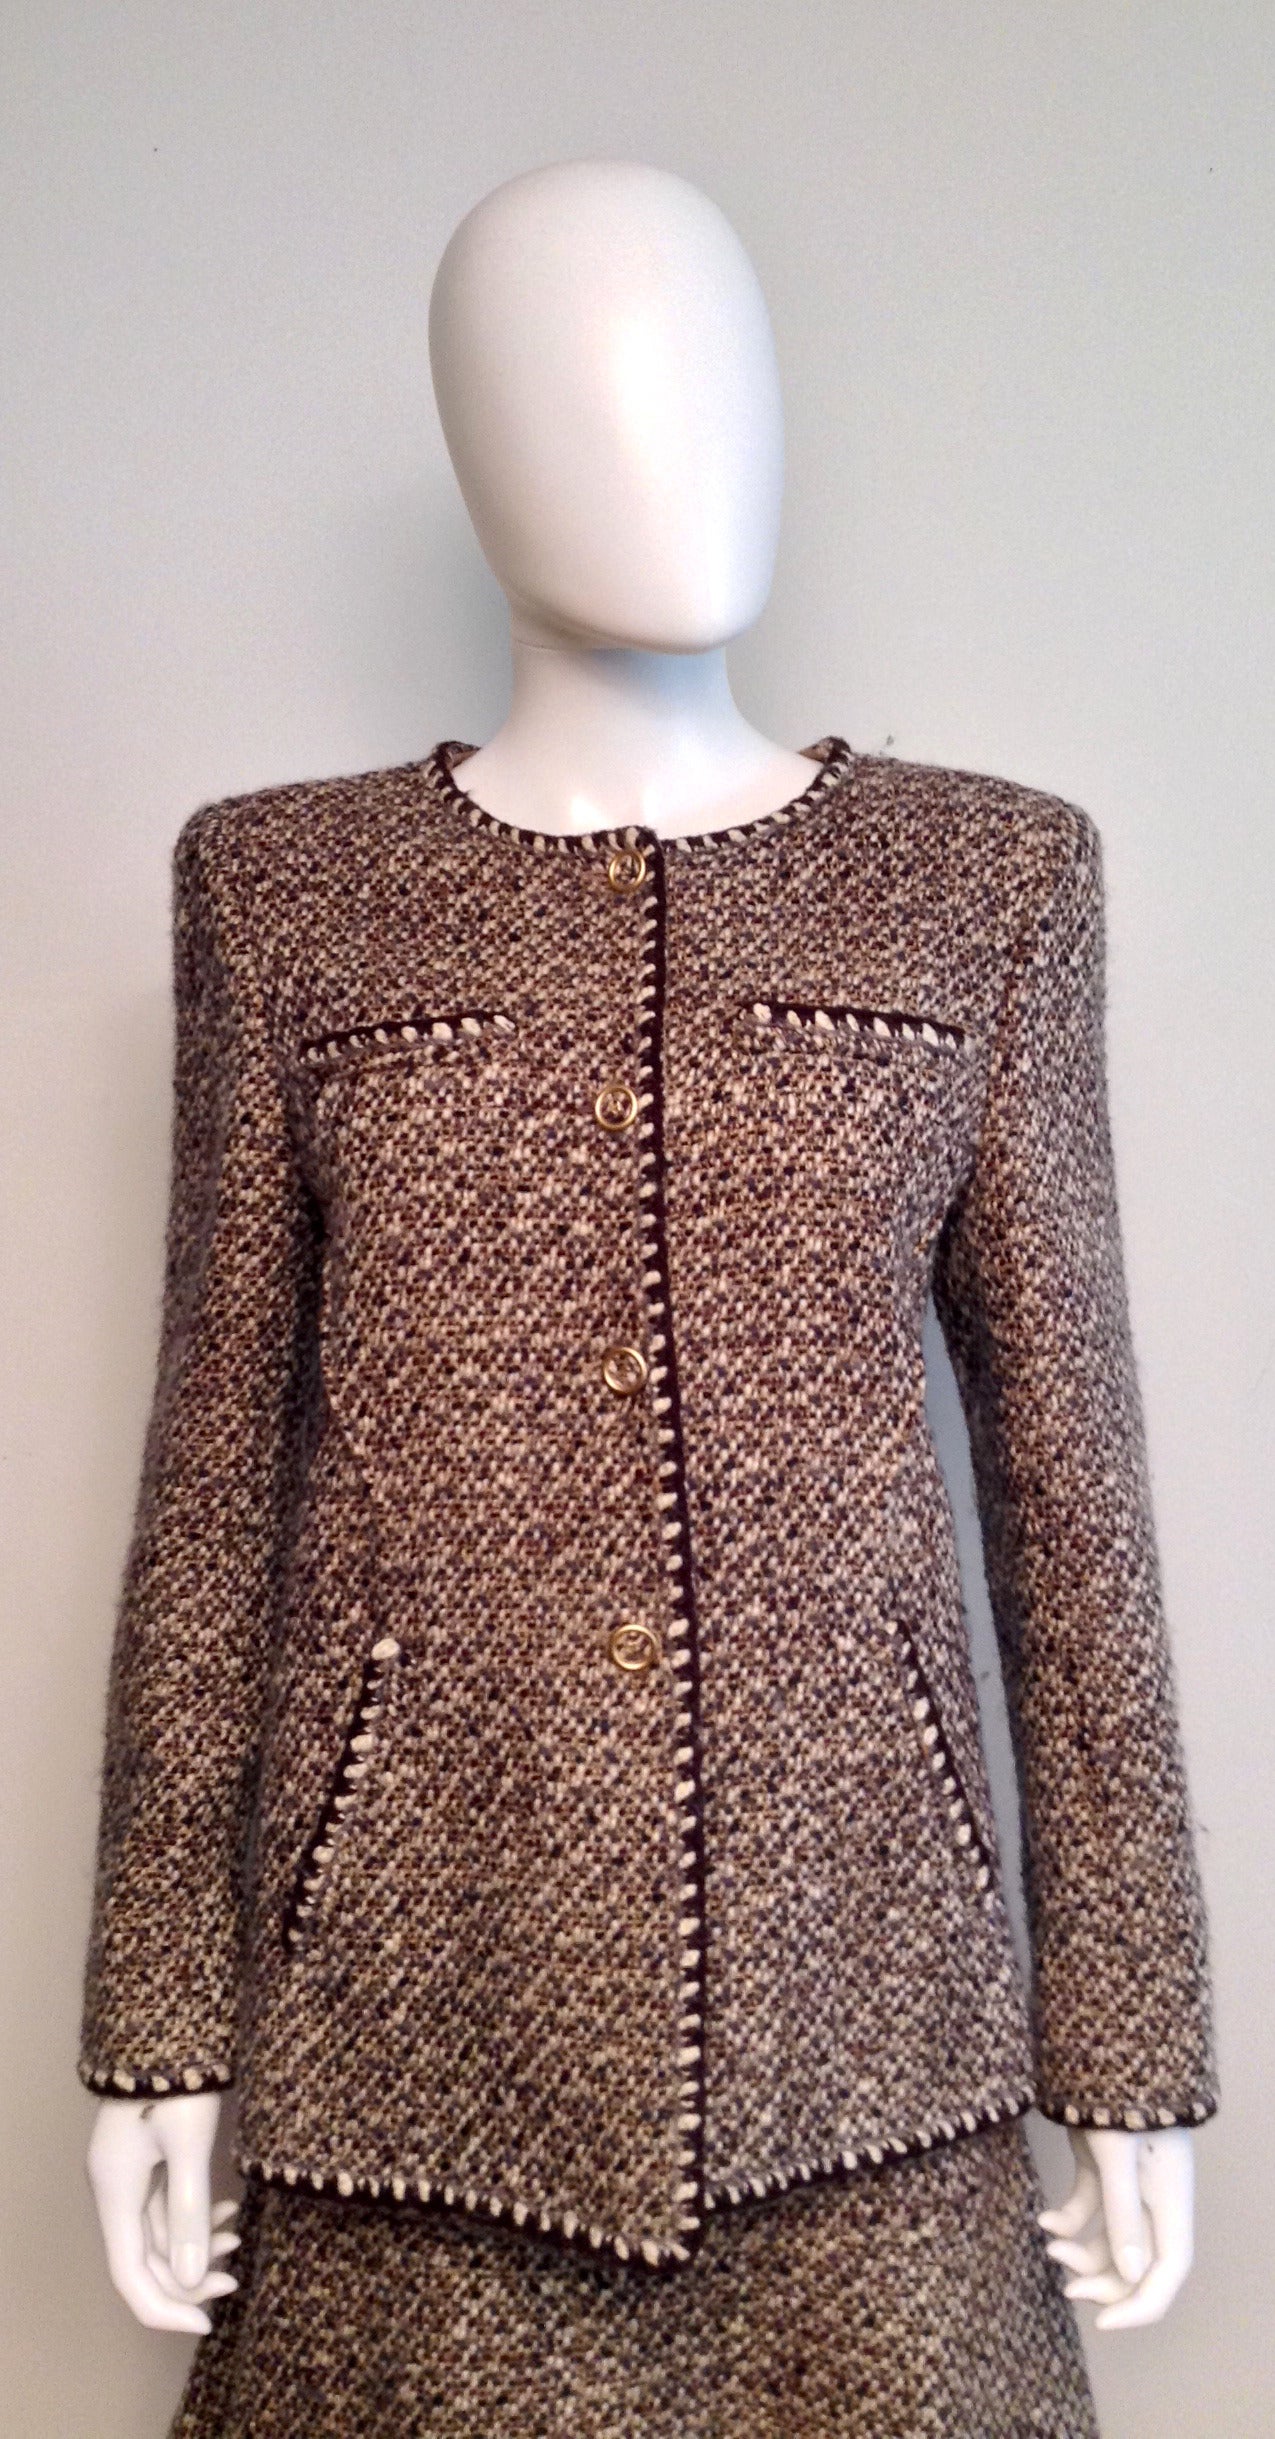 Classic Chanel tweed suit. Grey, brown, cream, and tan make up the tweed. 

Banded cuffs, pockets, and jacket edge. Jacket interior hem chain intact.

Lined with silk CC pattern. 

Measurements: bust 40